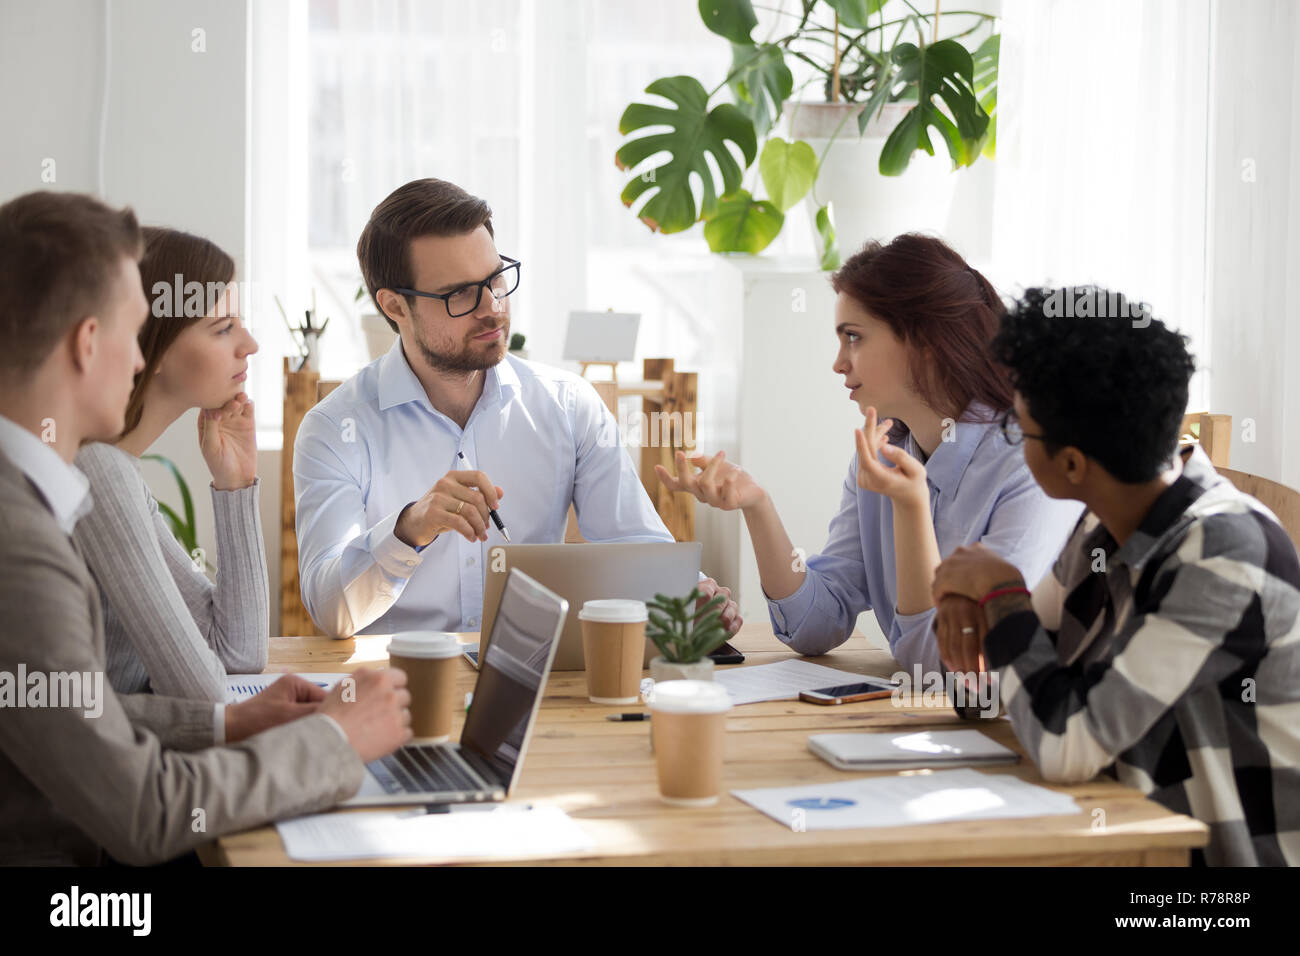 Diverse employees brainstorm at business office meeting Stock Photo